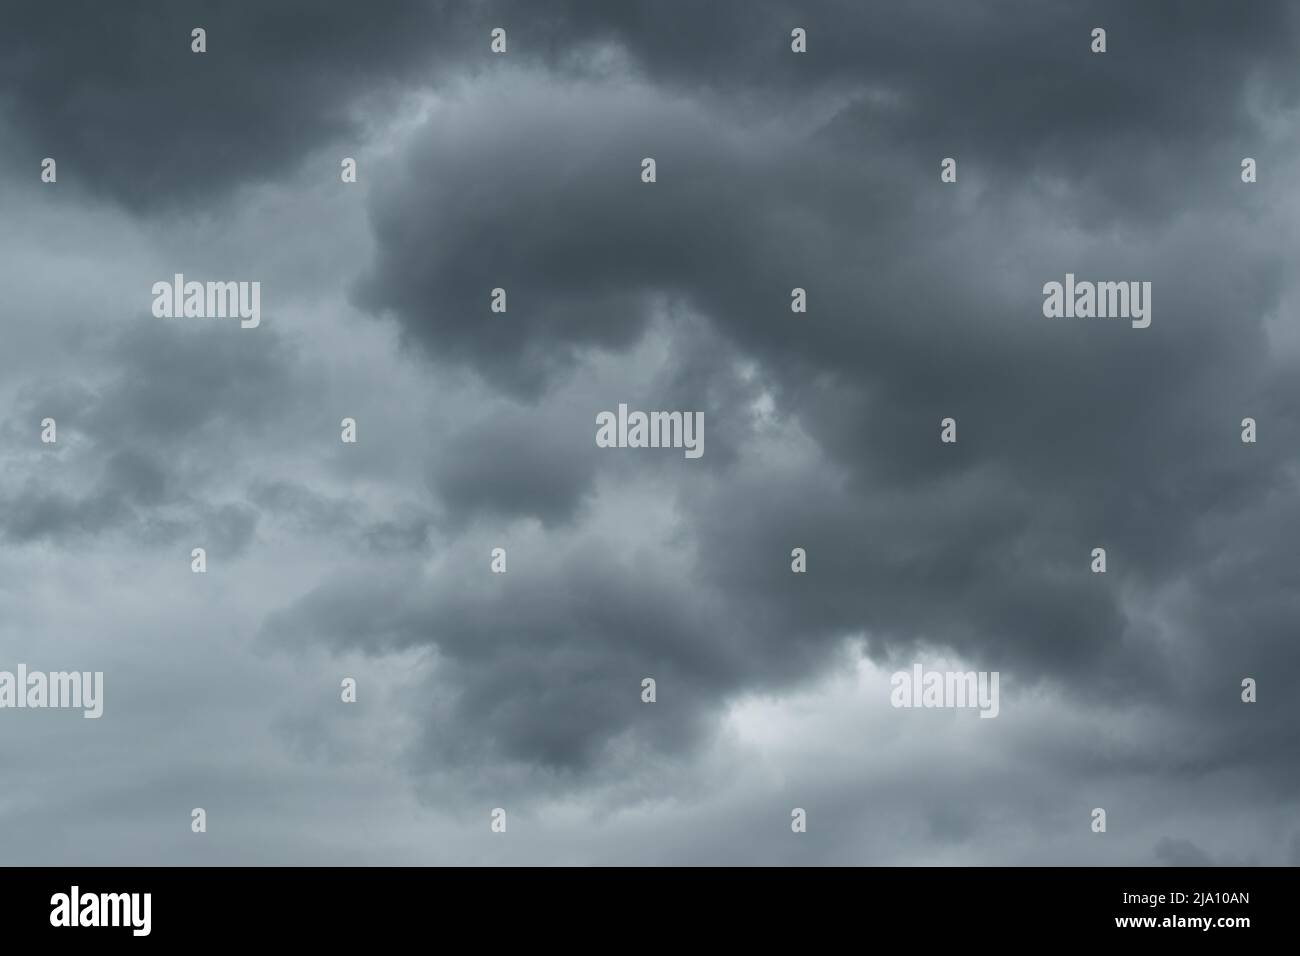 Abstract stormy weather clouds, dark gray ominous clouds, swirl movement in atmosphere Stock Photo